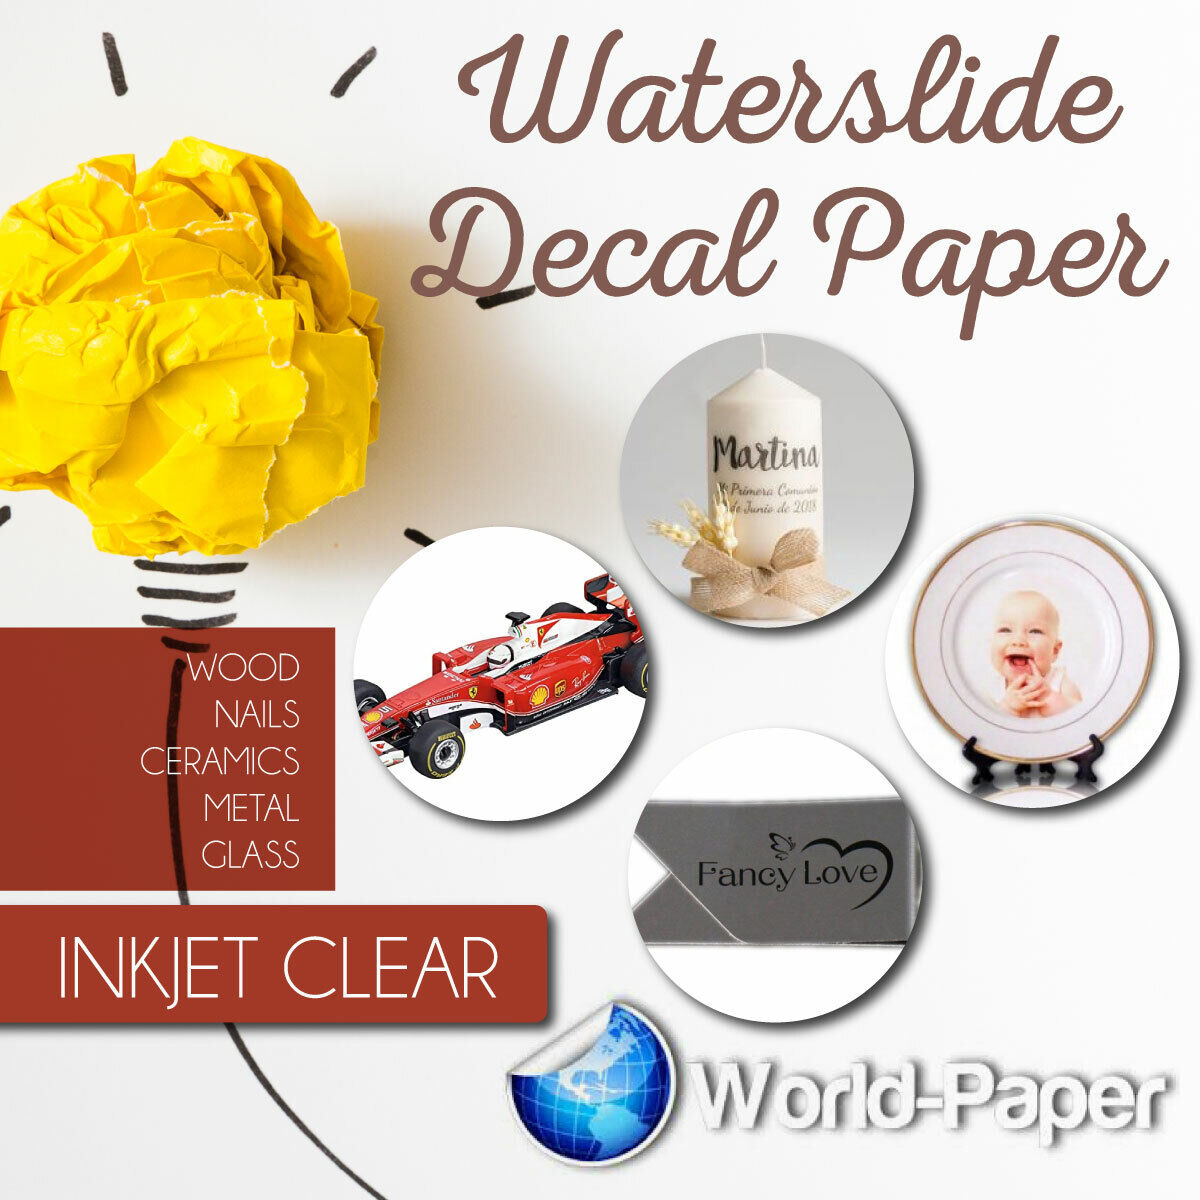 Waterslide Transfer Decal Paper Decalcomania DIY 10 Sheets INKJET CLEAR 8.5x11#1